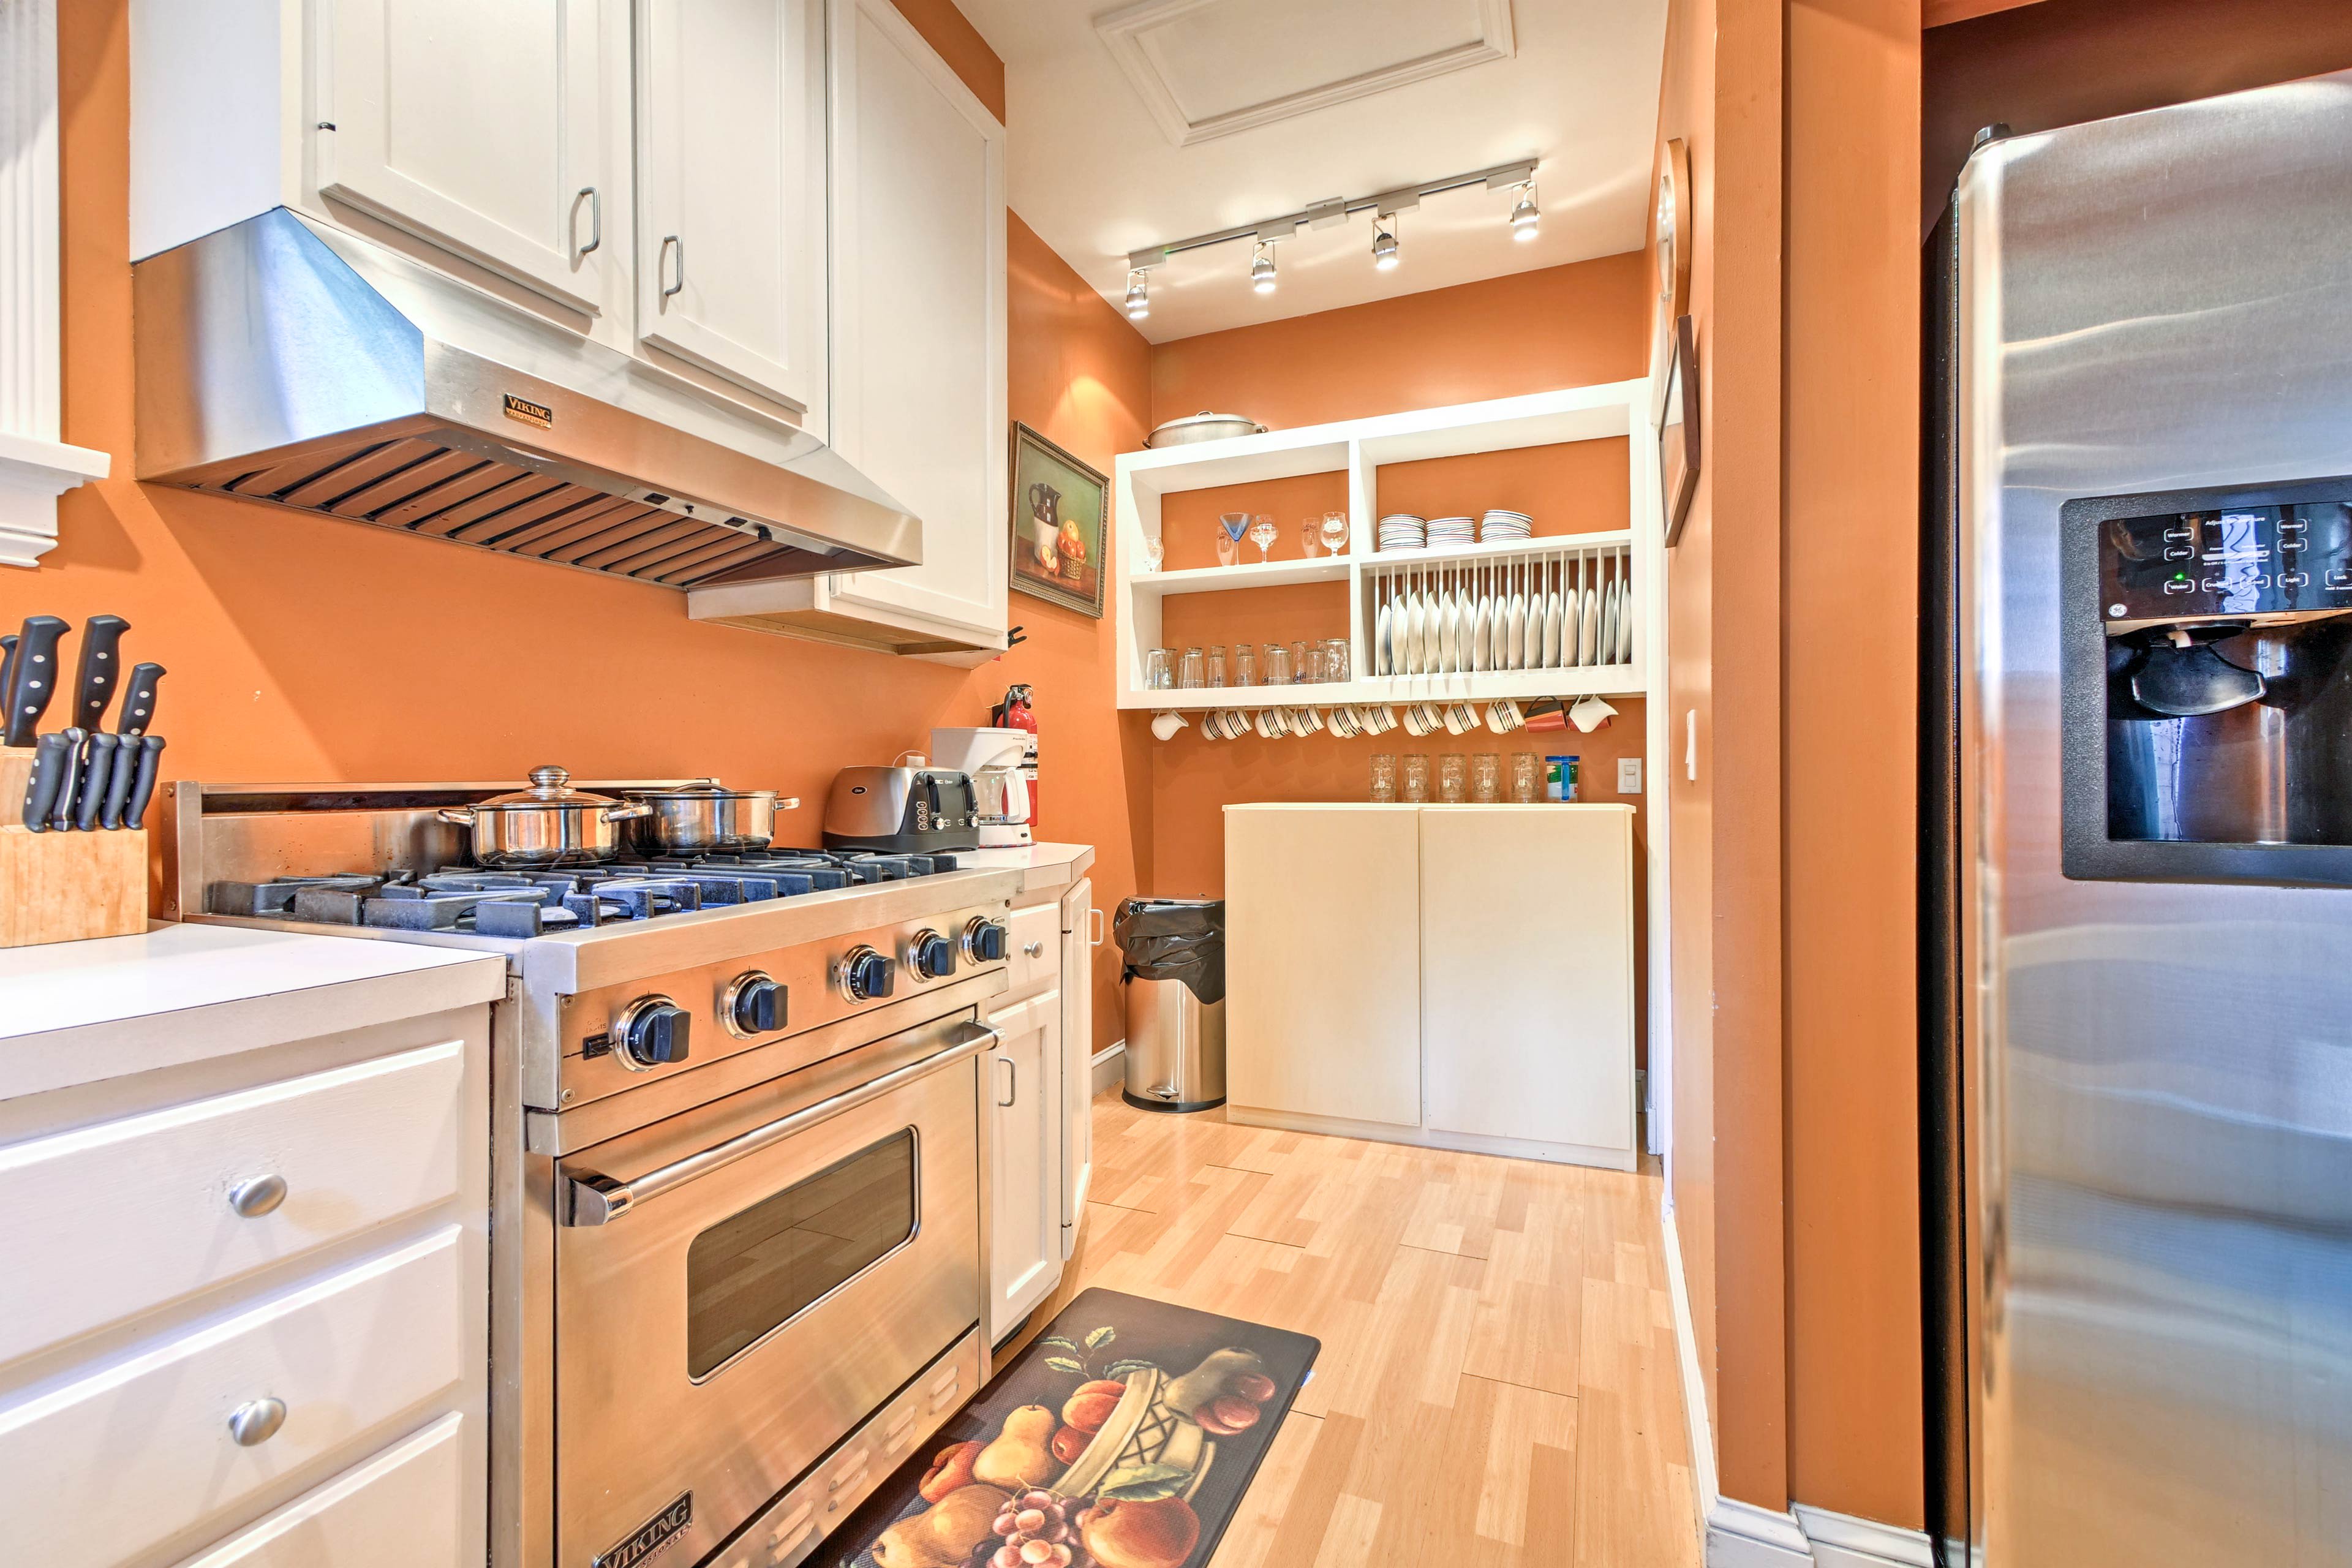 The fully equipped kitchen has been updated with stainless steel appliances.